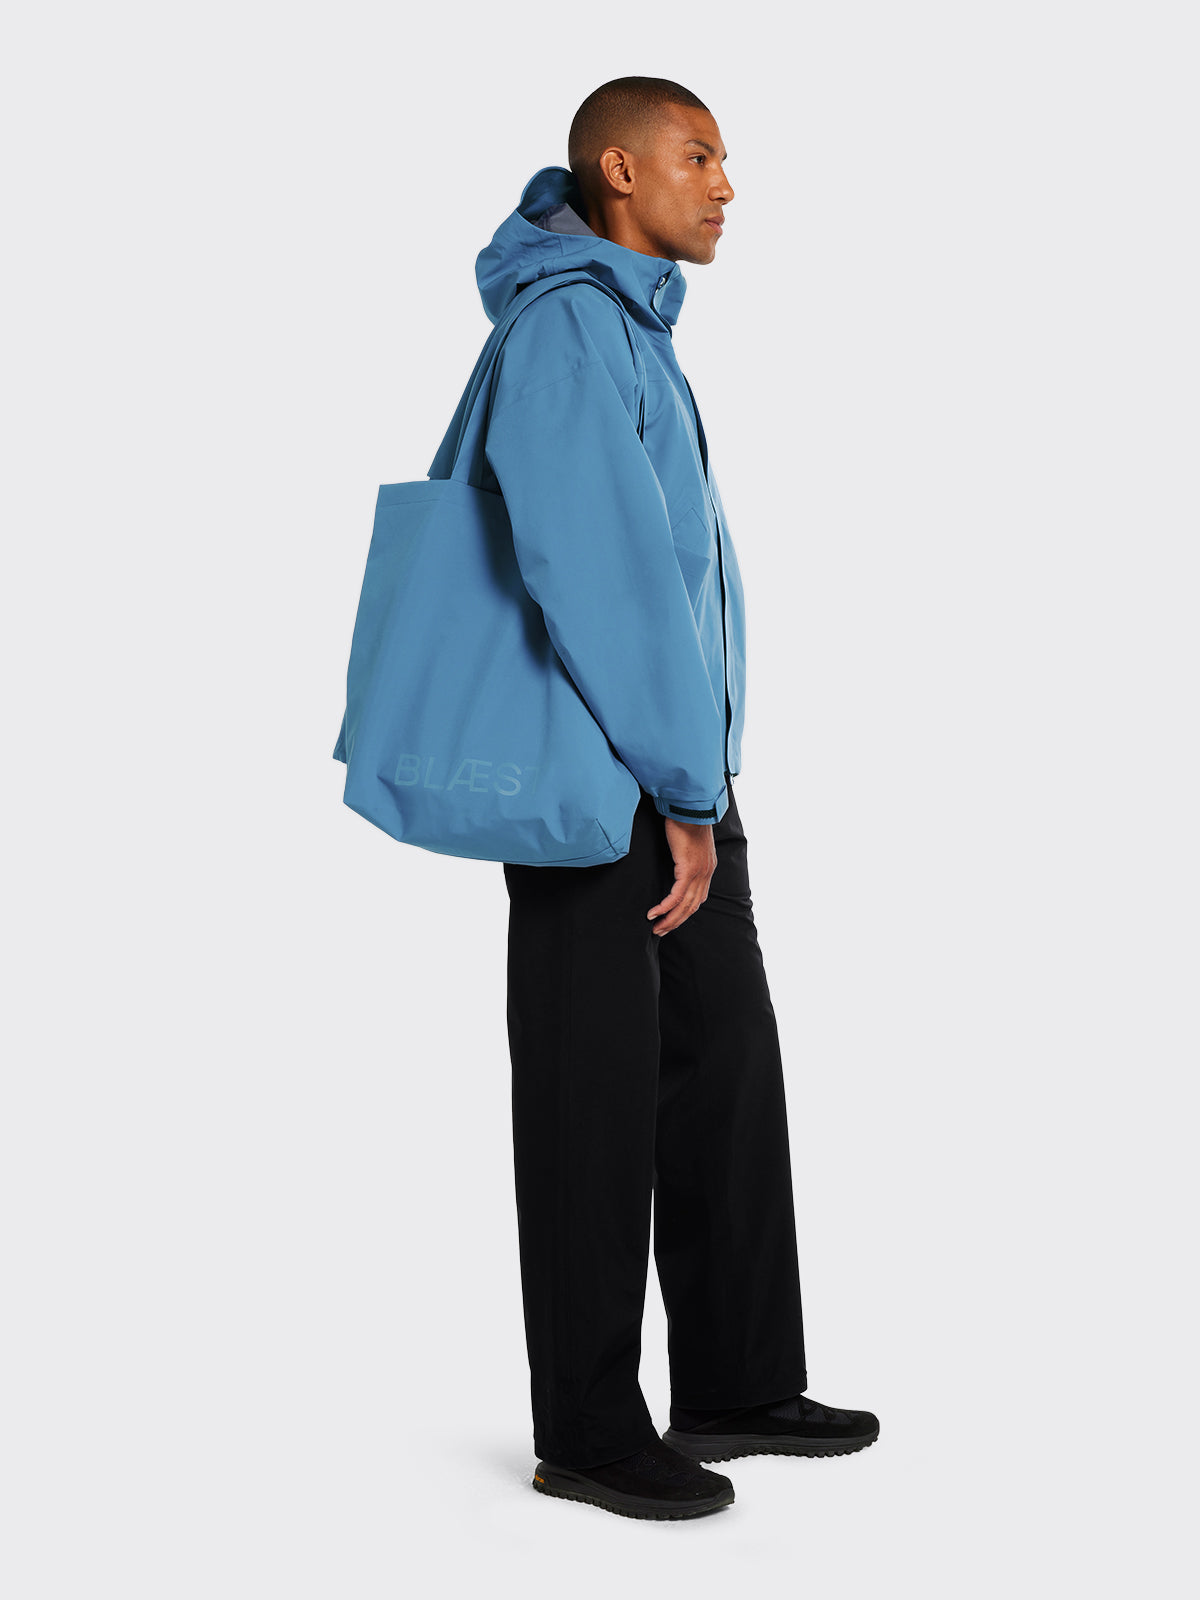 Man wearing Synes jacket and Moa tote bag by Blæst in Coronet Blue